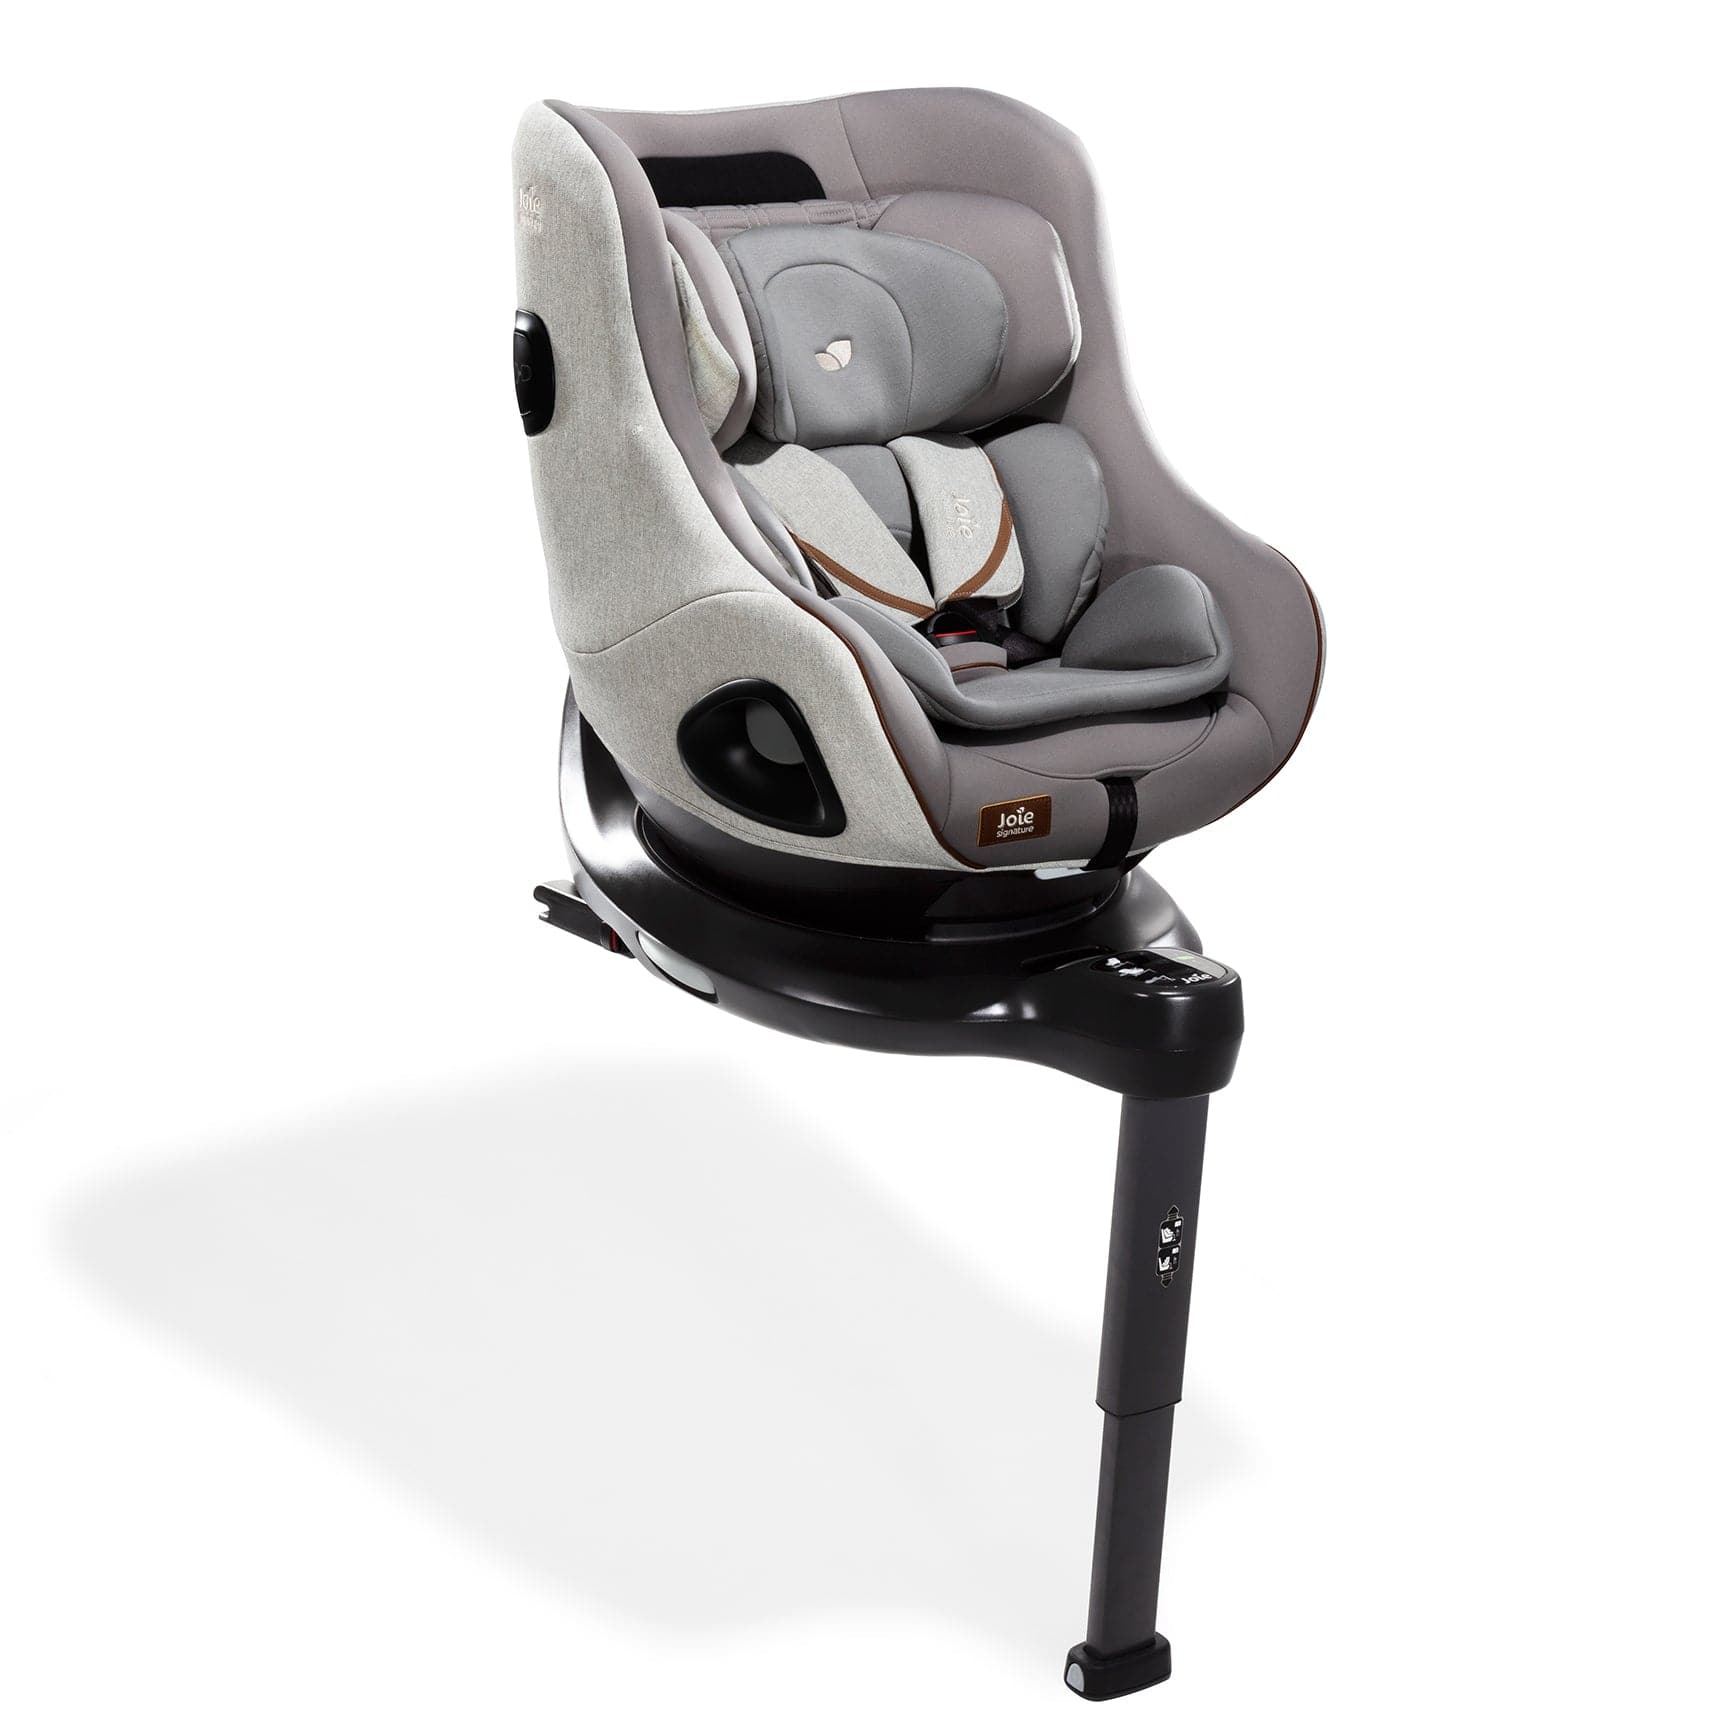 Joie i-Size car seats Joie i-Harbour and i-Base Encore - Oyster 12221-OYS